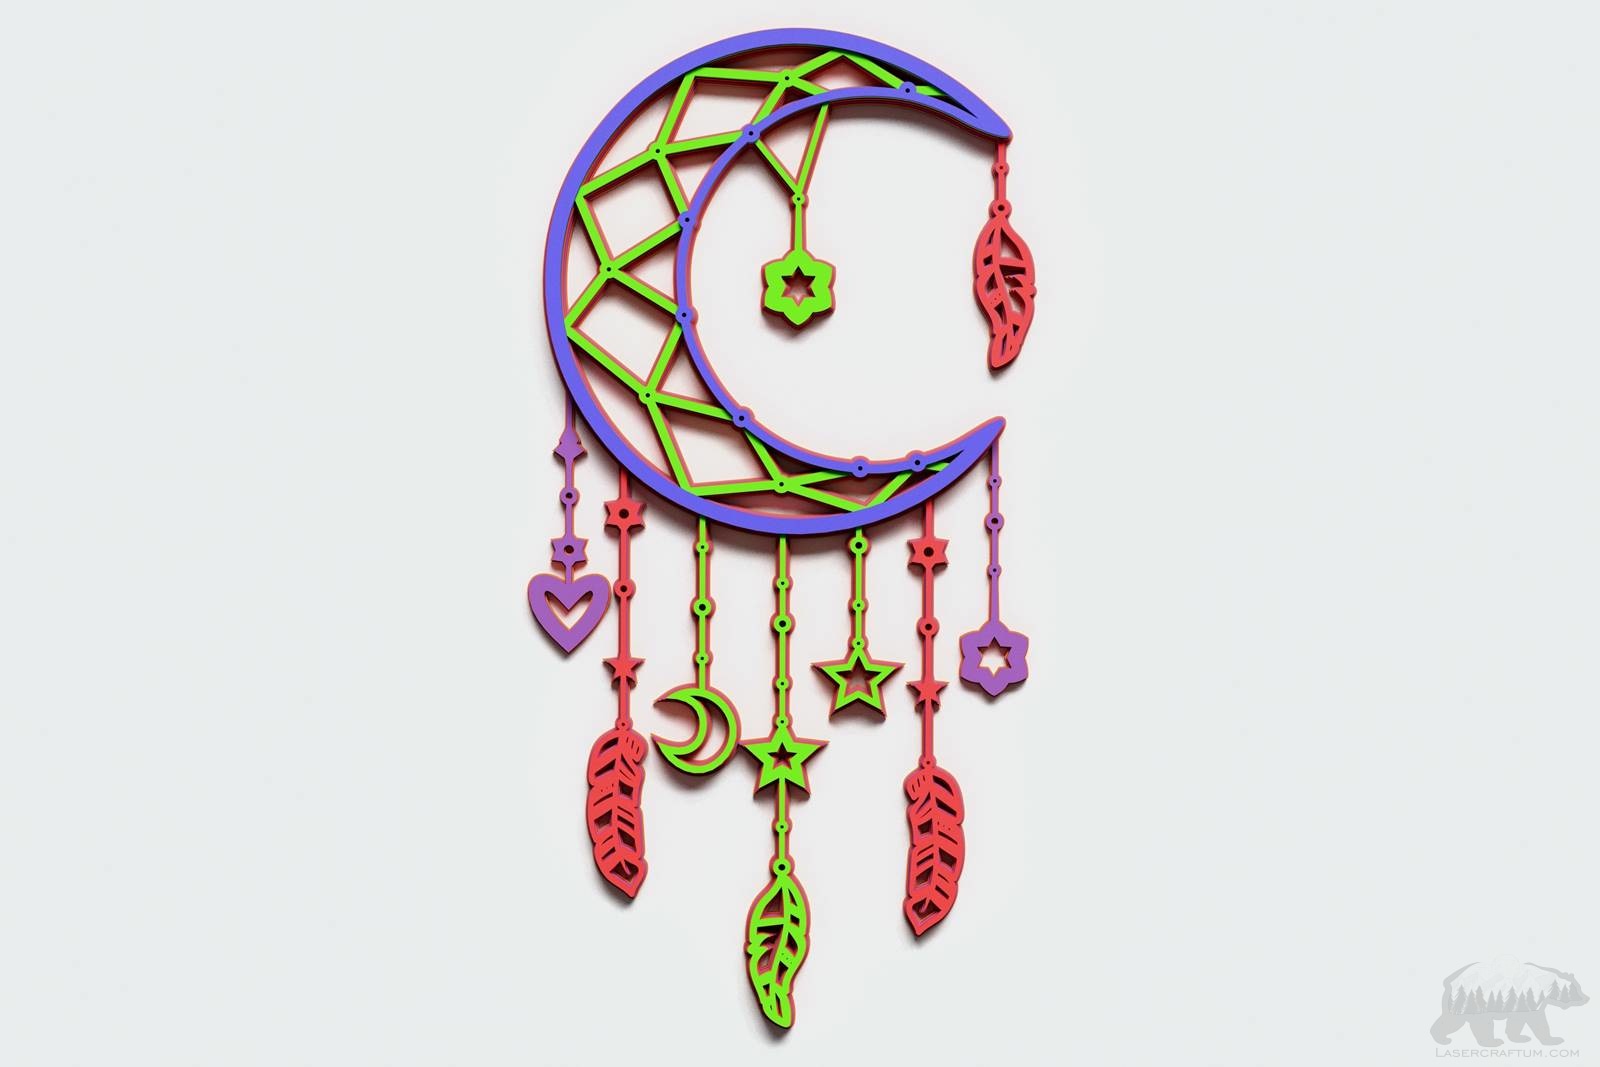 Moon Dream Catcher. Free Layered Design for cutting